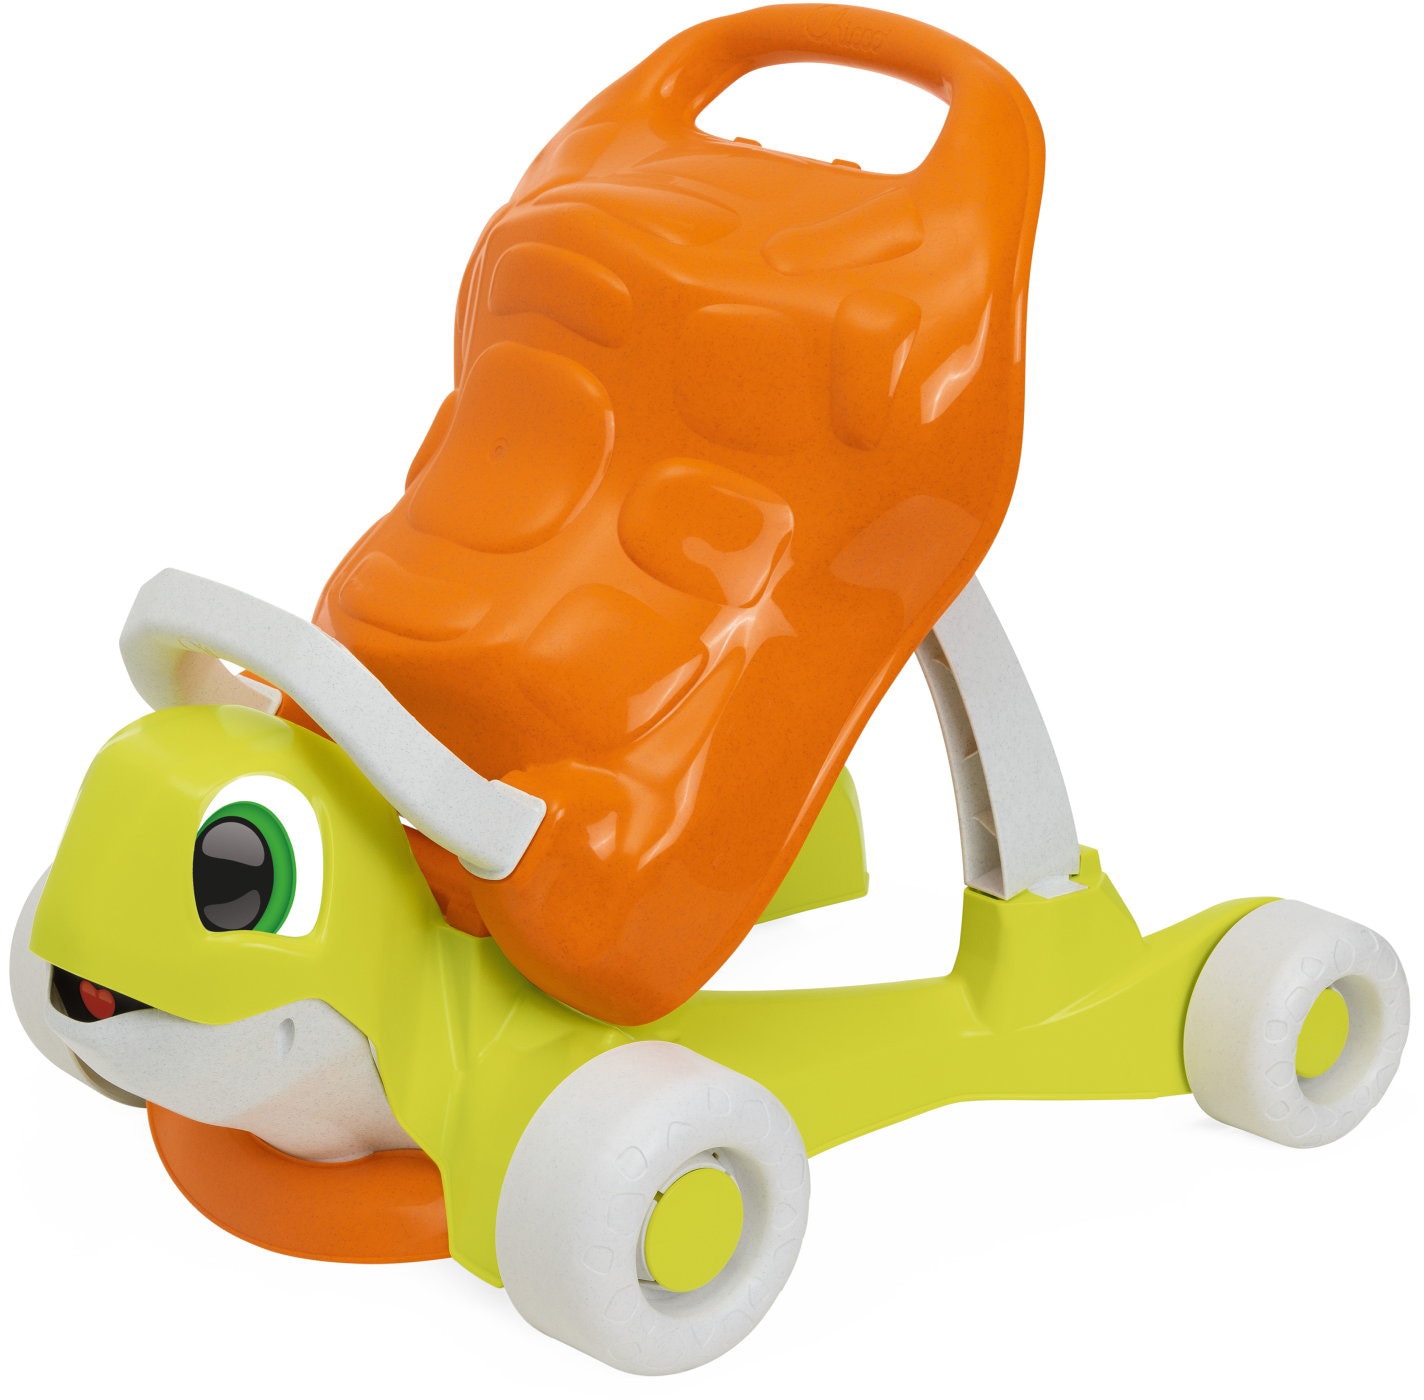 Chicco Lauflernhilfe »Walk&Ride Turtle«, teilweise aus recyceltem Material; Made in Europe von Chicco